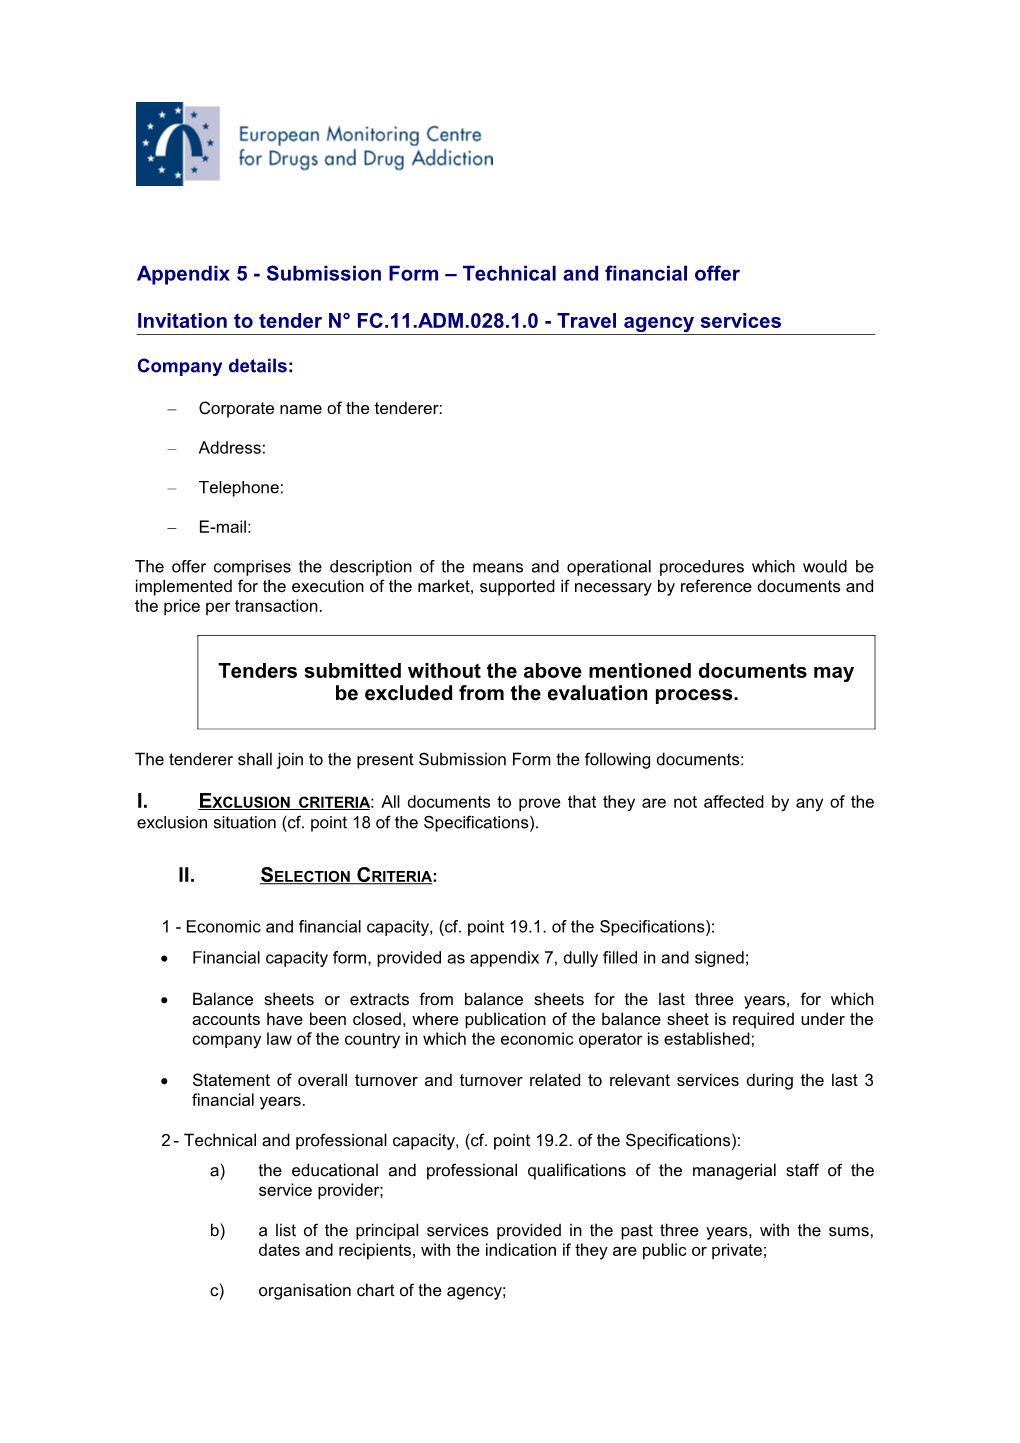 Appendix 5 - Submission Form Technical and Financial Offer